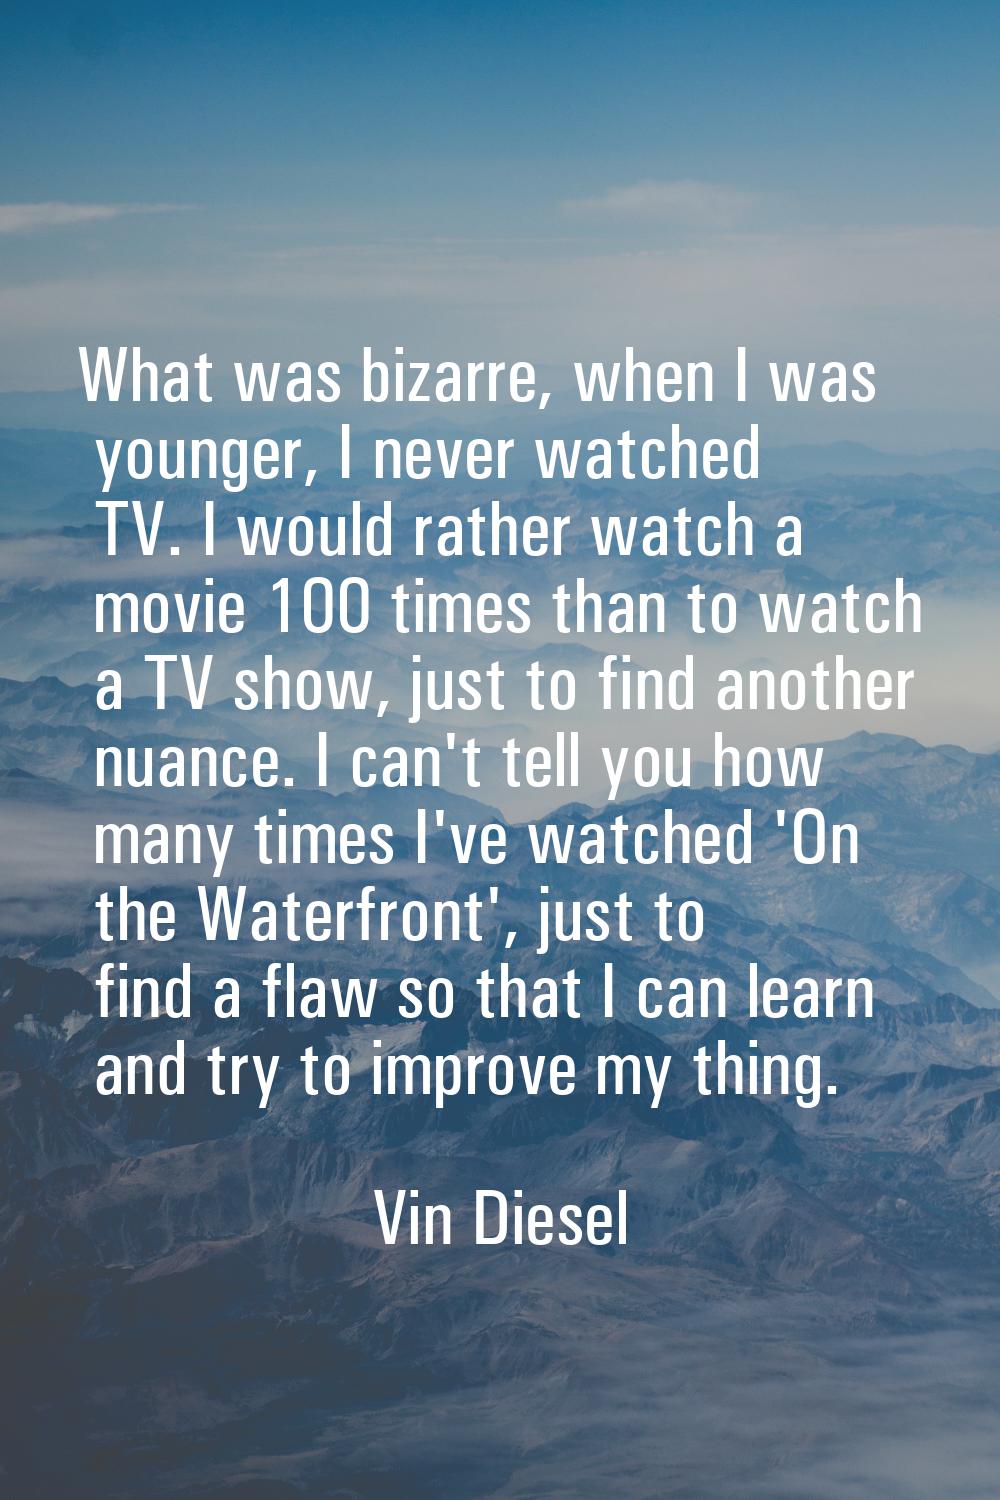 What was bizarre, when I was younger, I never watched TV. I would rather watch a movie 100 times th